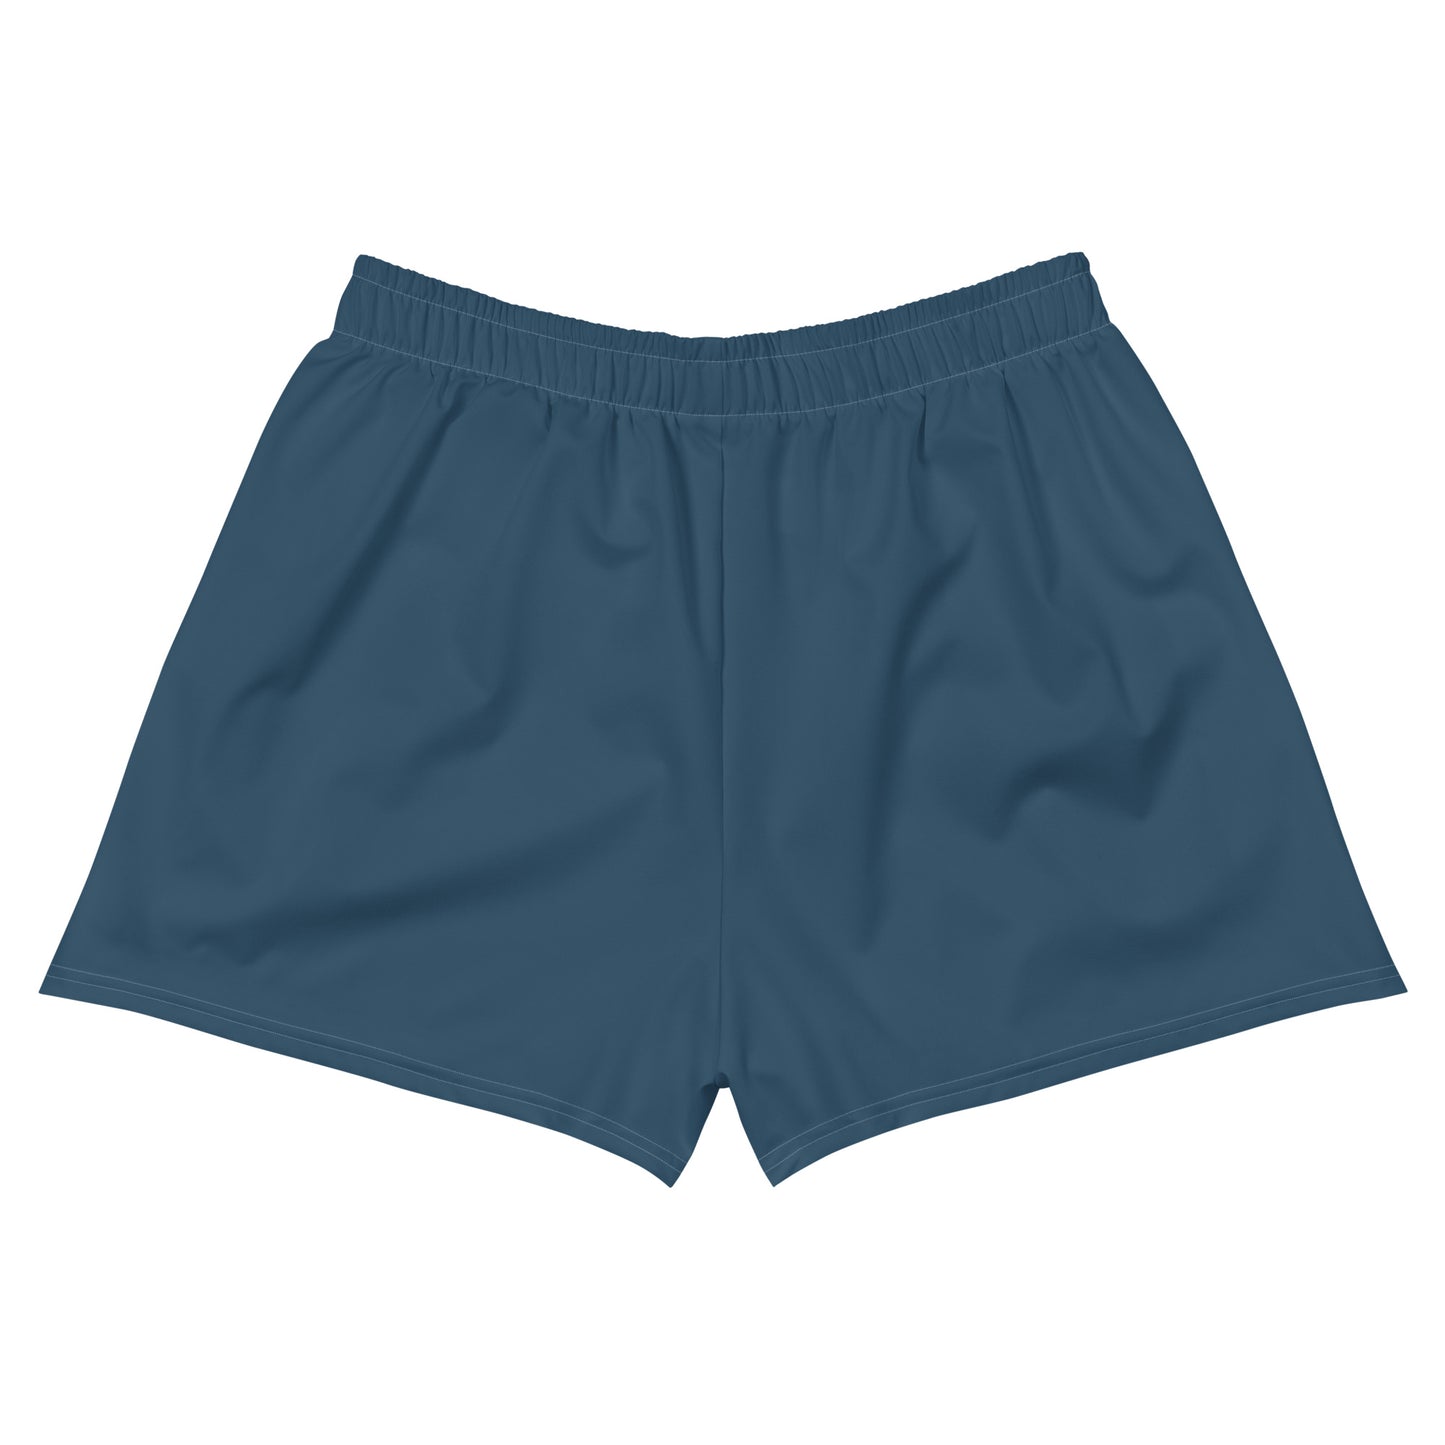 Ocean Blue Climate Change Global Warming Statement - Sustainably Made Women’s Recycled Athletic Shorts